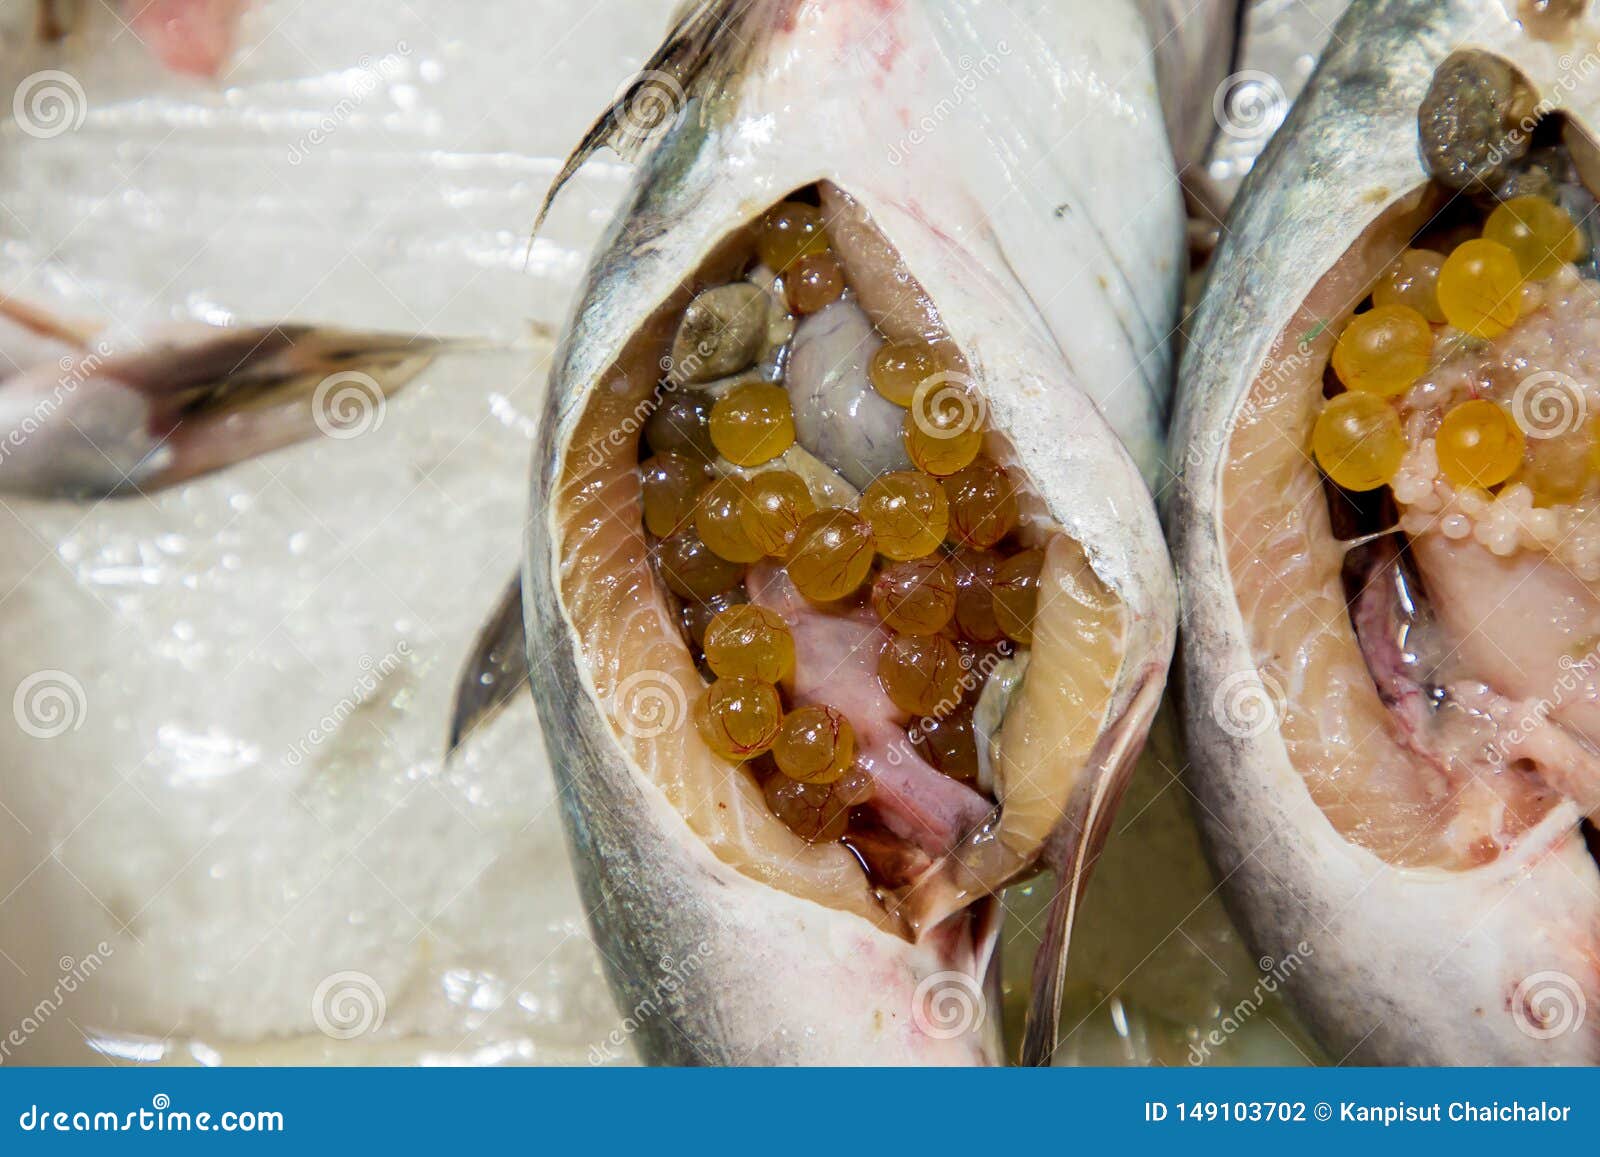 Catfish Eggs Clear Catfish Eggs. Orange Curry Fish Eggs and the People Thai  Say ` Ryukyus Fish ` Fresh Seafood from Live Market . Stock Photo - Image  of giant, marine: 149103702